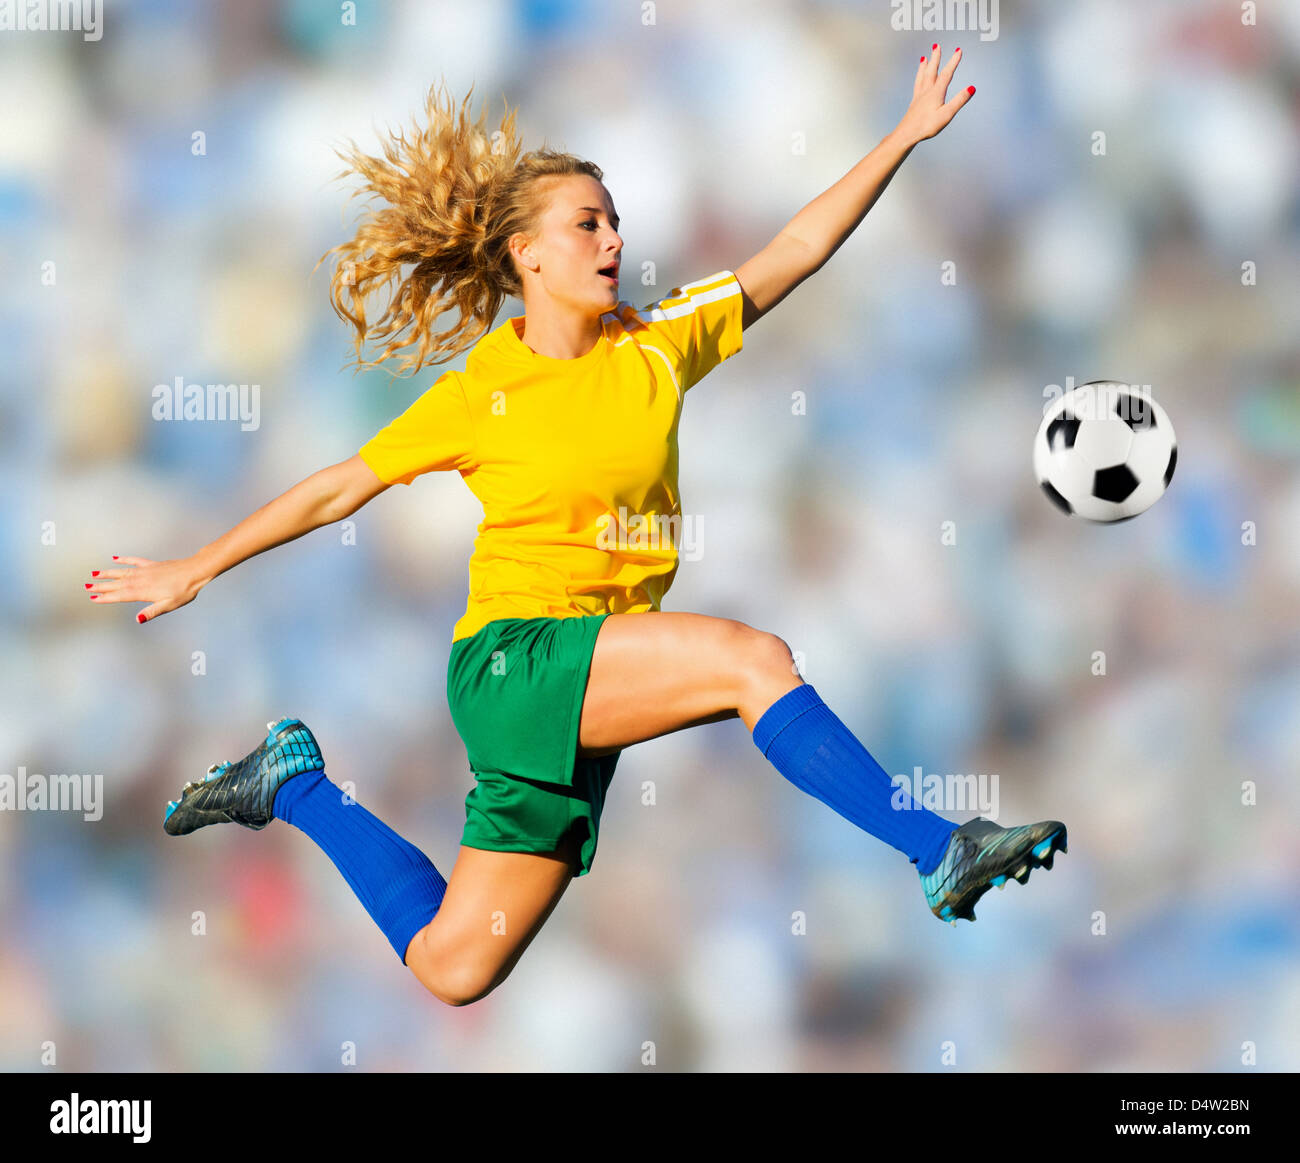 Soccer player kicking in mid-air Stock Photo